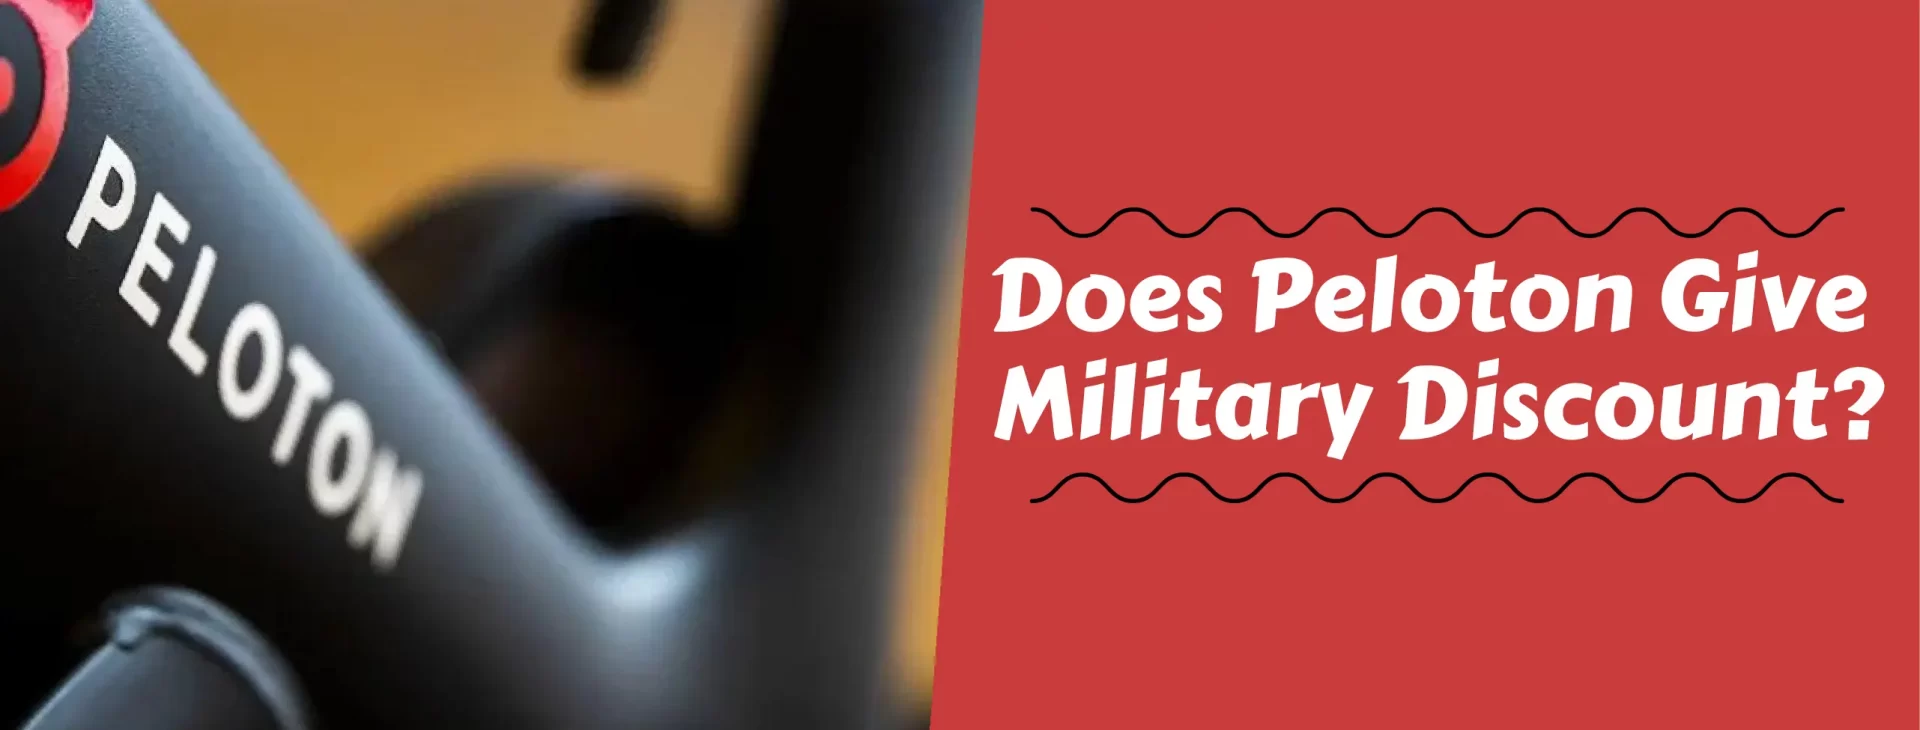 Does Peloton Give a Military Discount